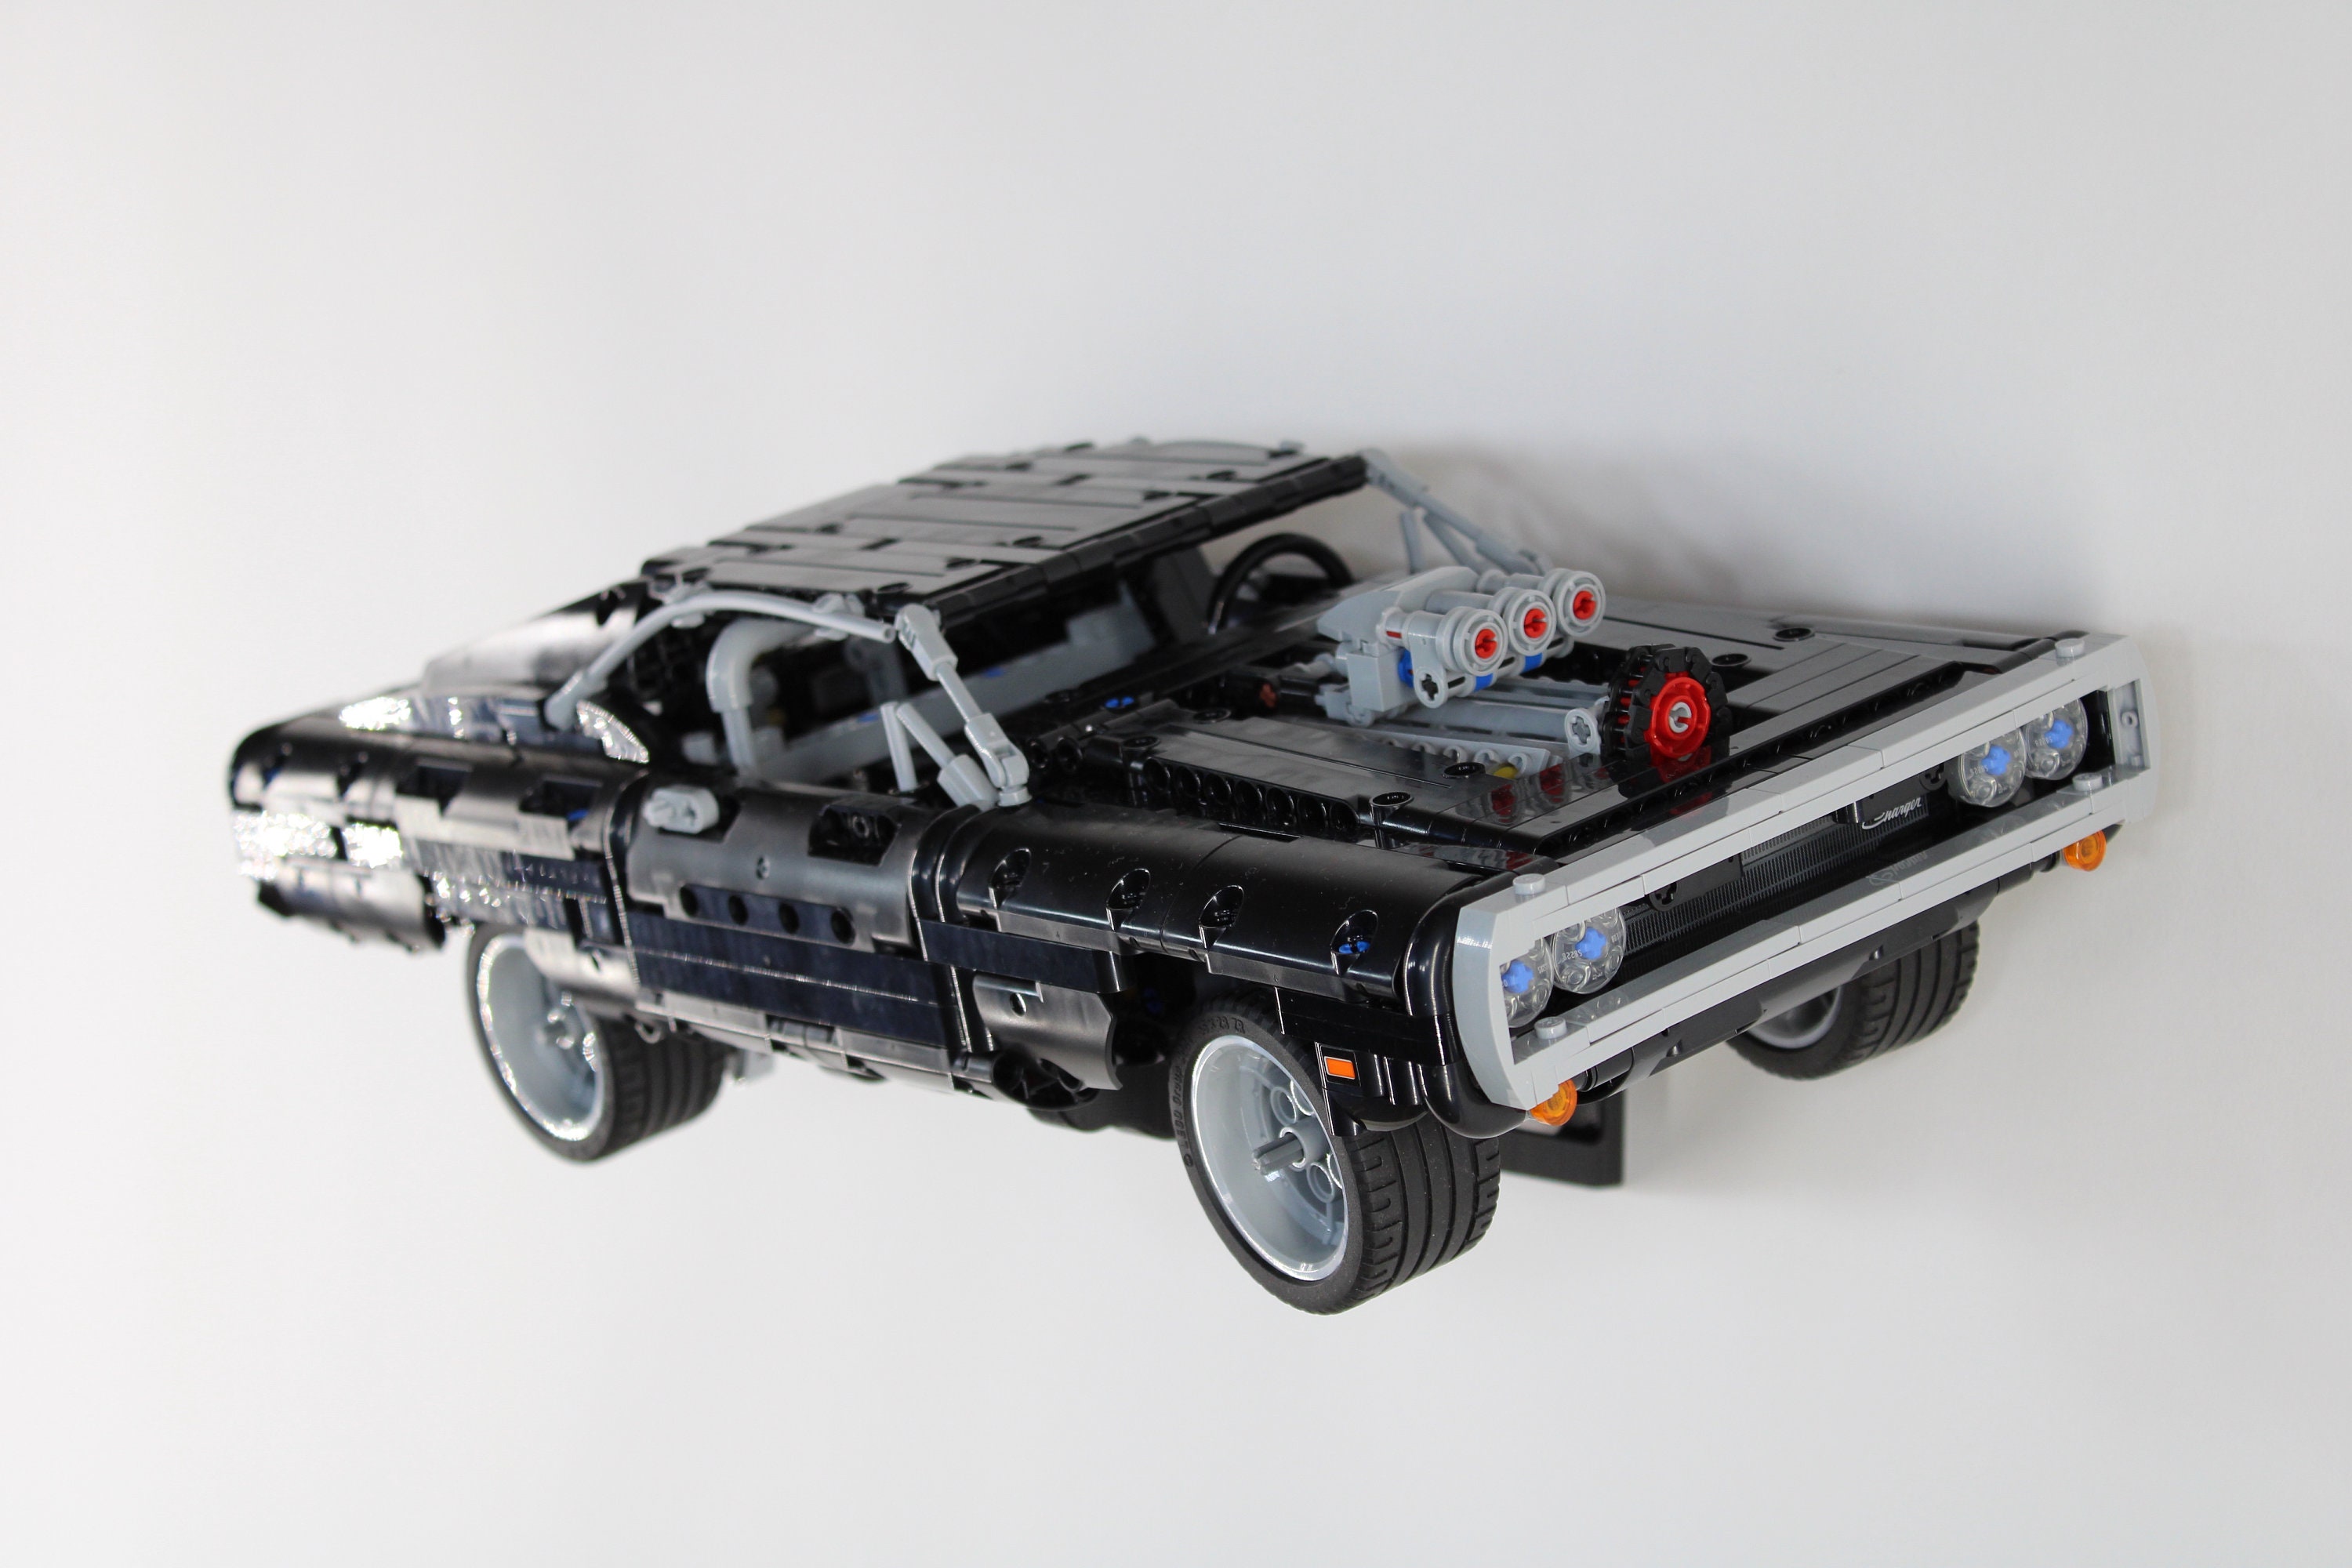 Lego Technic Fast Furious Dom Dodge Charger  Lego Technic 42111 Dom Dodge  Charger - Blocks - Aliexpress